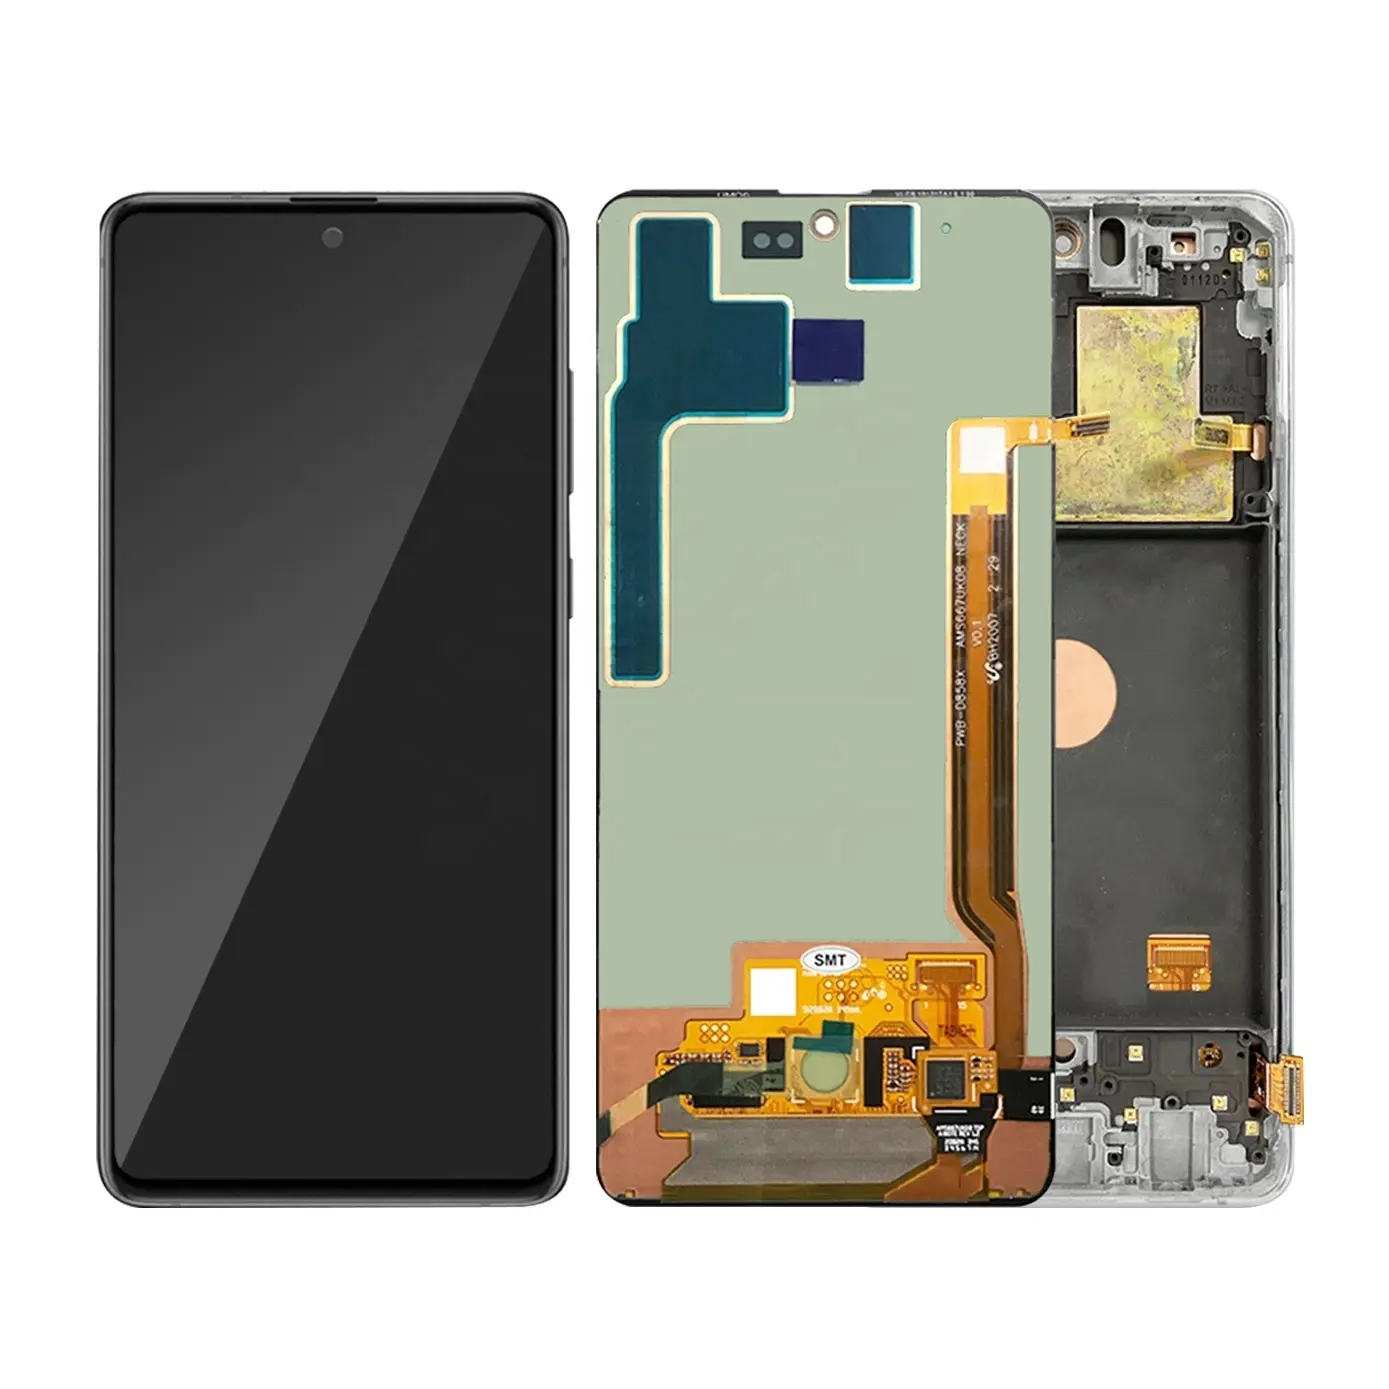 AMOLED TFT For Samsung Galaxy Note 10 Lite LCD N770F/DS N770F/DSM with Frame Display Touch Screen Digitizer note10 lite N770